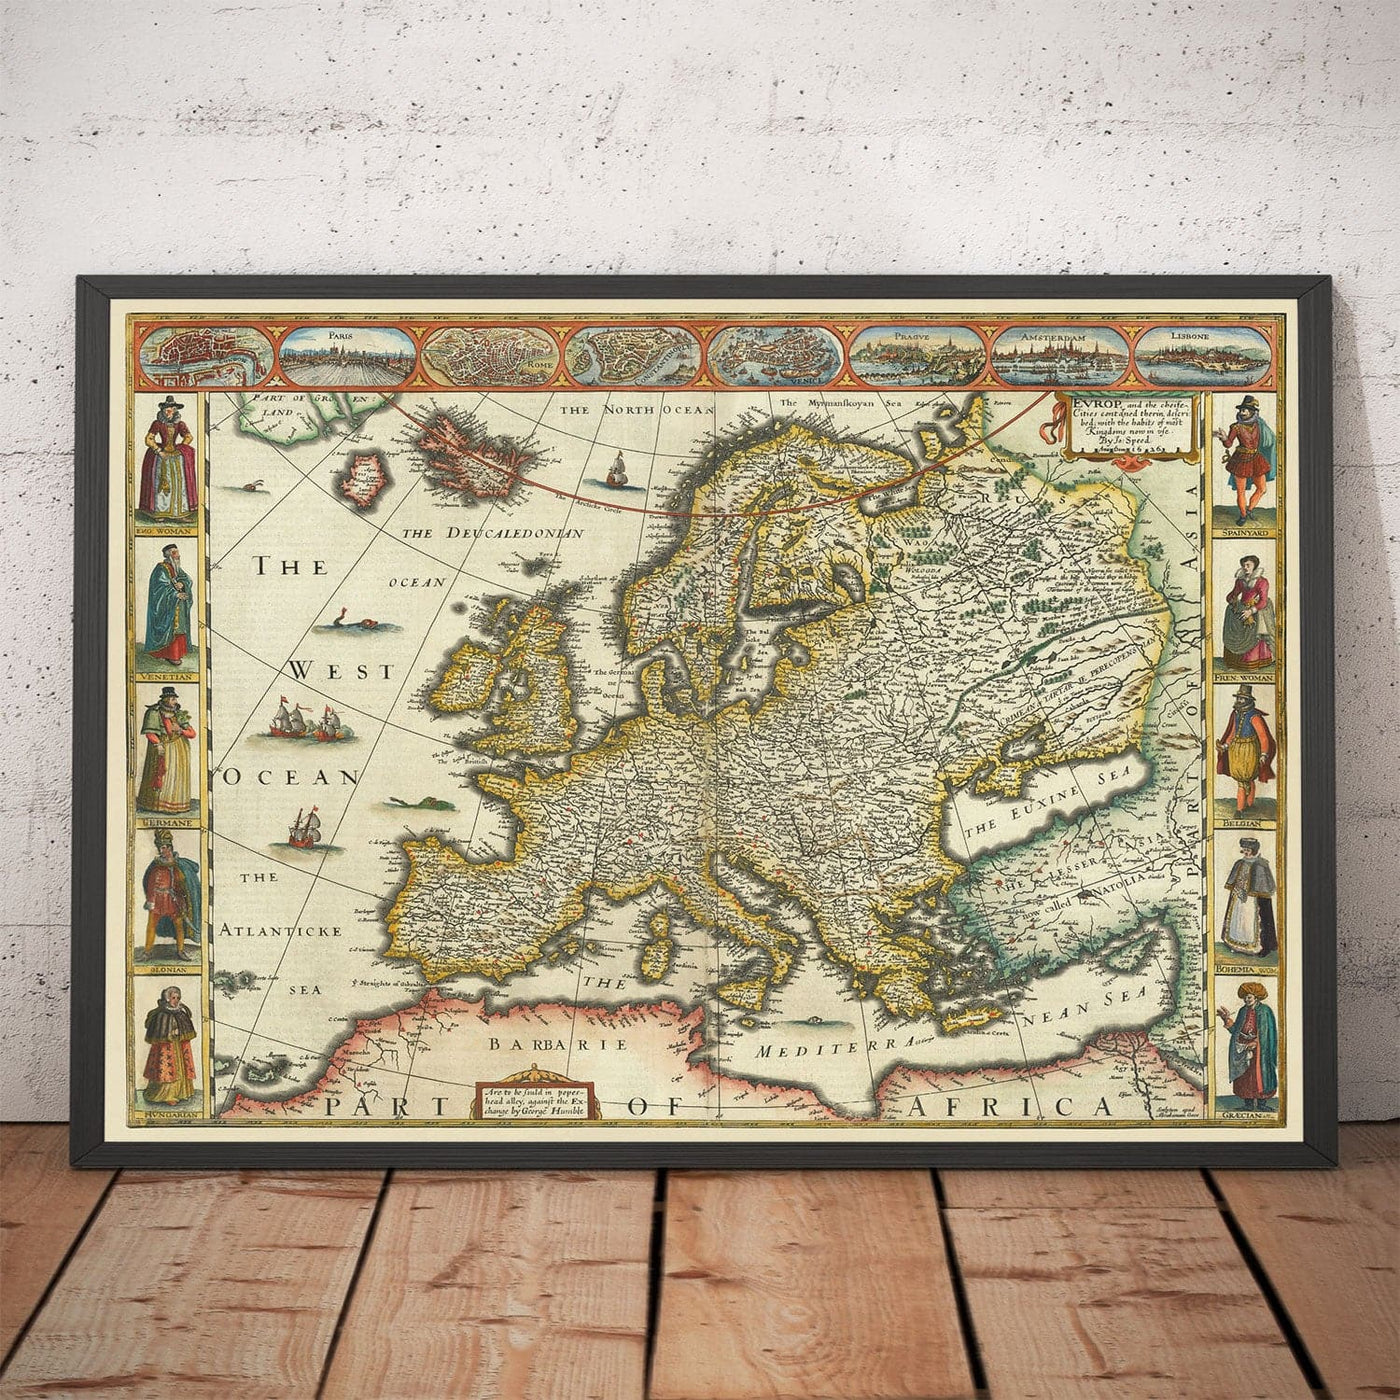 Old Map of Europe by John Speed, 1627 - England, France, Germany, Italy, Russia - Cities, Jacobean Clothing